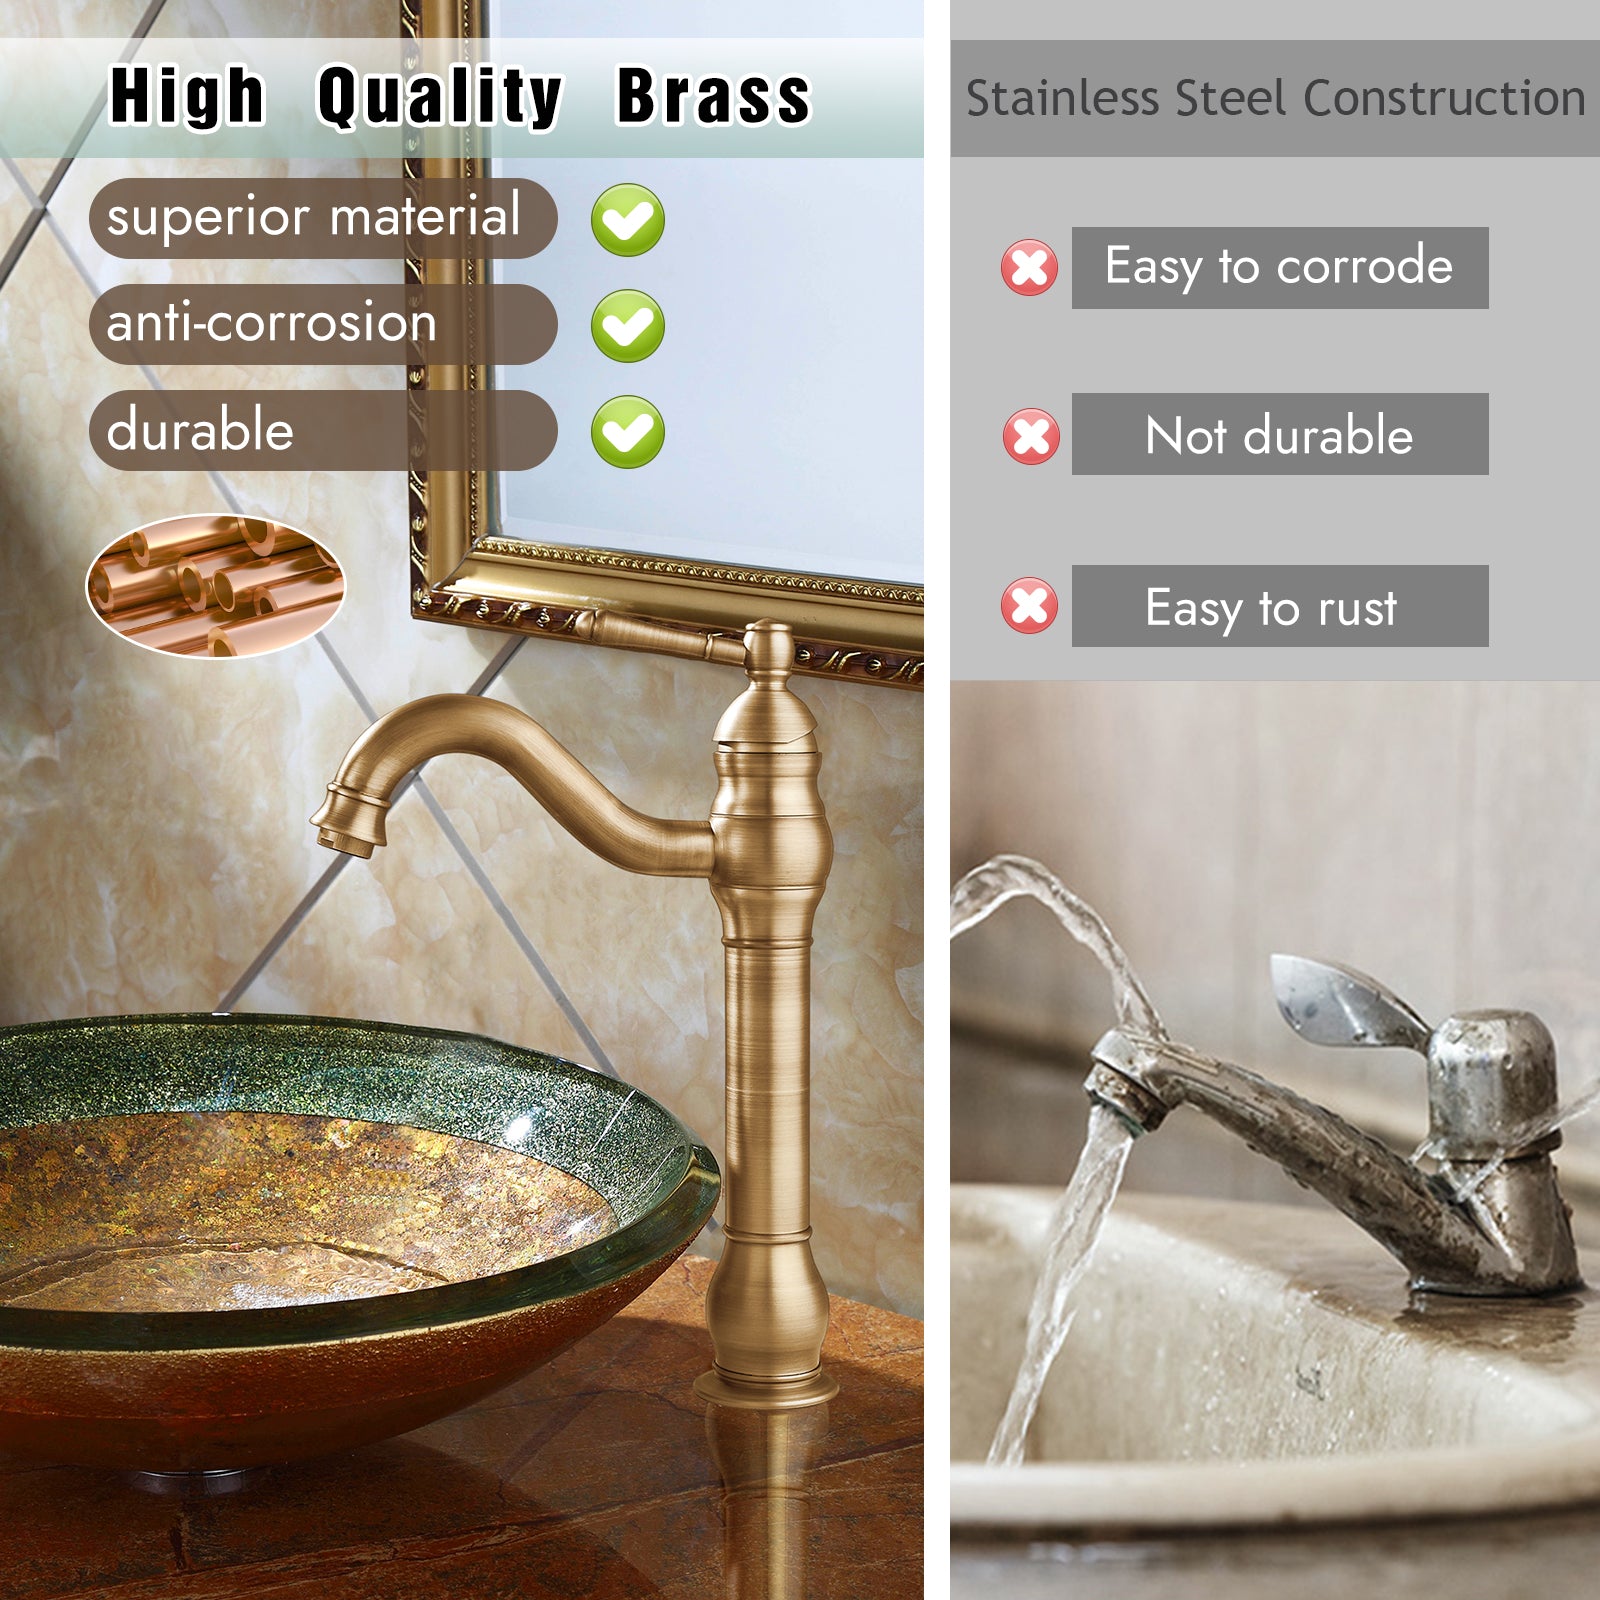 Heyalan Bathroom Vessel Sink Faucet Washingroom Single Handle One Hole High Spout Pop Up Drain Bowl Sink Brass Material 360 Degree Adjustable Lavatory Vanity Mixer Bar Tap Without Overflow